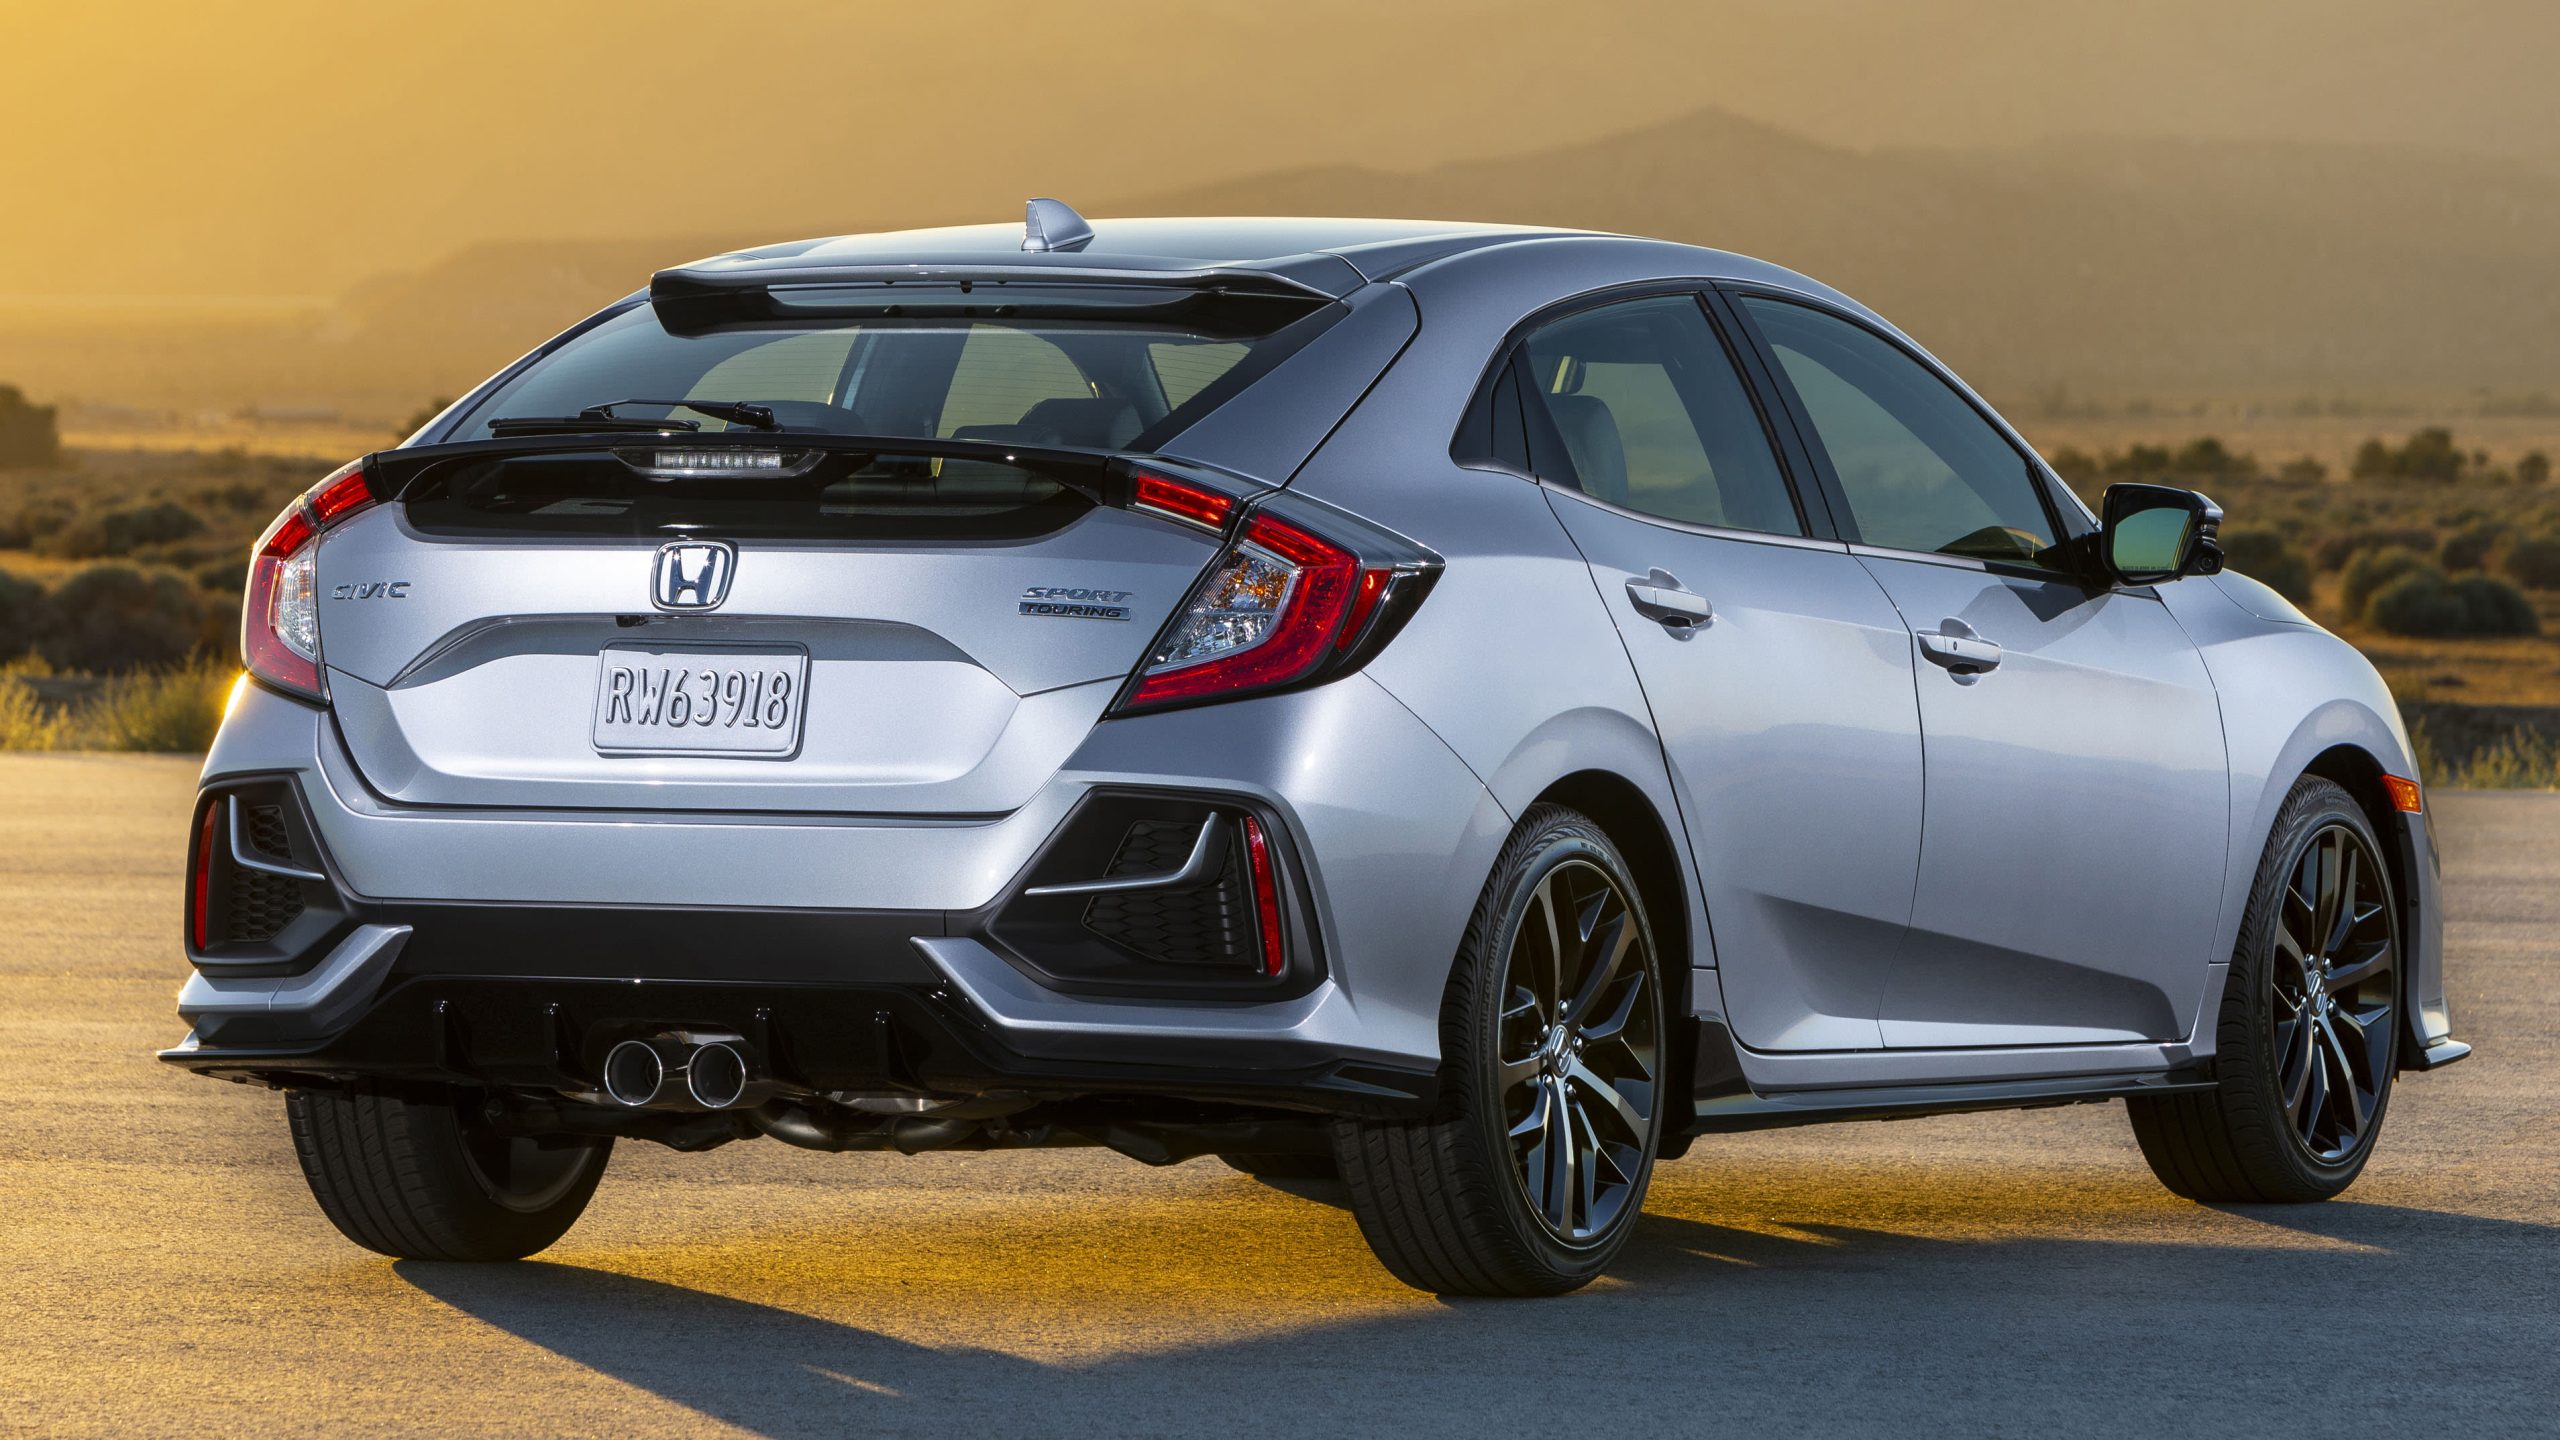 How Much is a 2020 Honda Civic